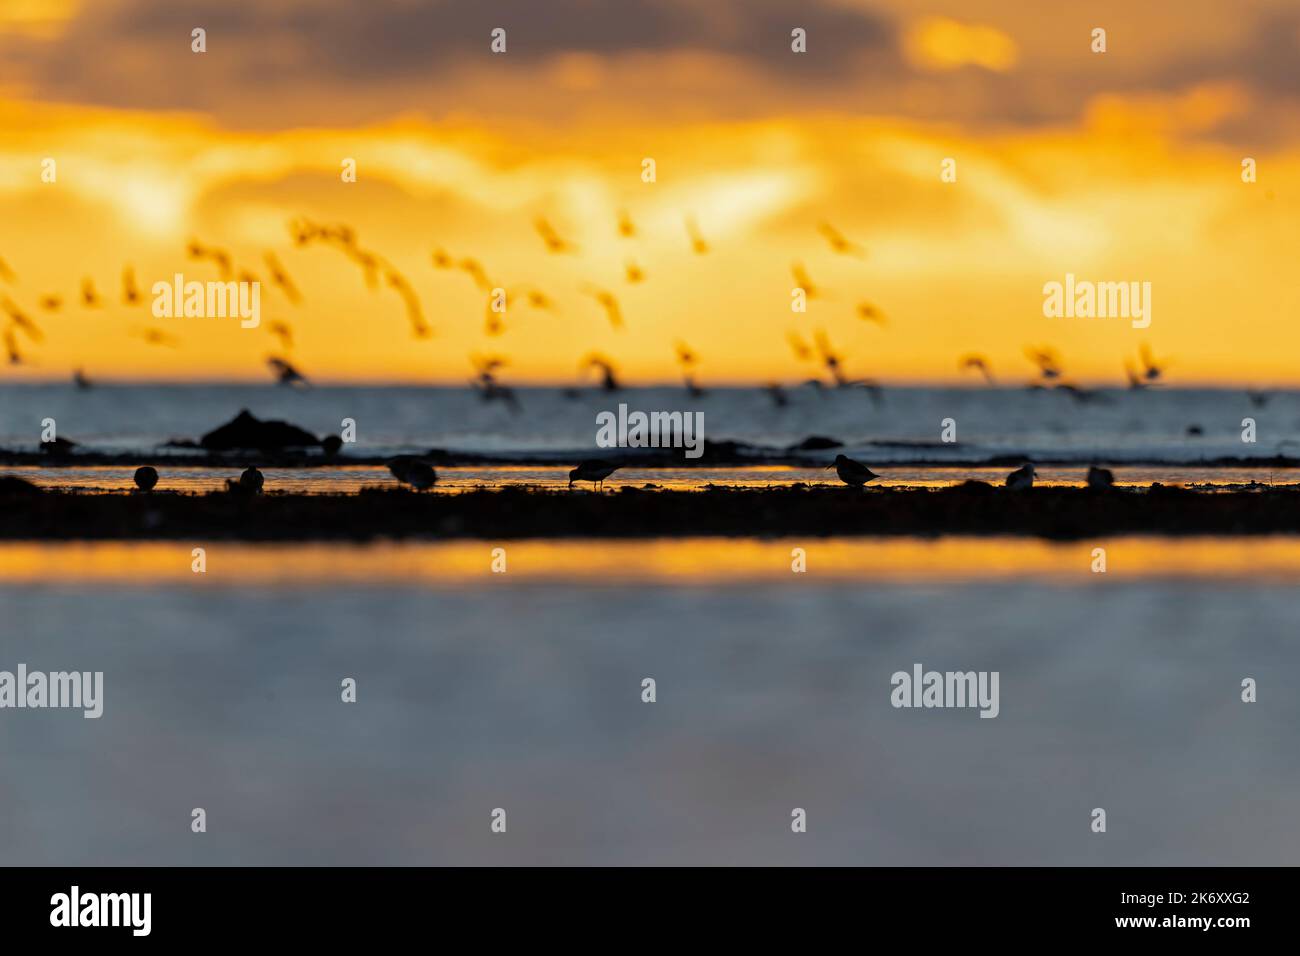 A group of small waders or shore birds flying along the Baltic sea in Germany Stock Photo